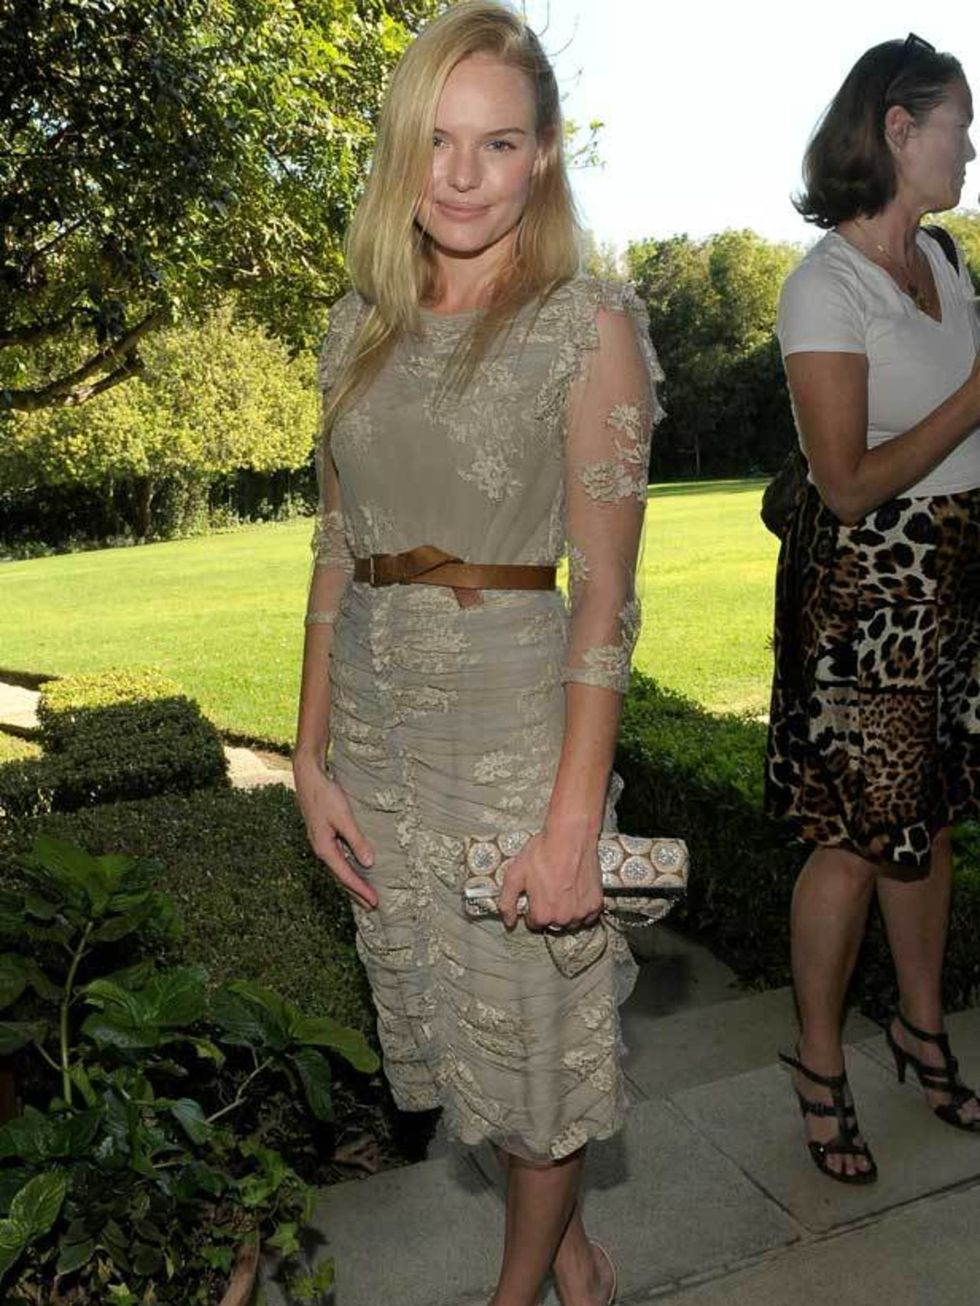 <p><a href="http://www.elleuk.com/starstyle/style-files/%28section%29/kate-bosworth/%28offset%29/12/%28img%29/140881">Kate Bosworth</a> in <a href="http://www.elleuk.com/catwalk/collections/burberry-prorsum/autumn-winter-2010">Burberry Prorsum </a></p>